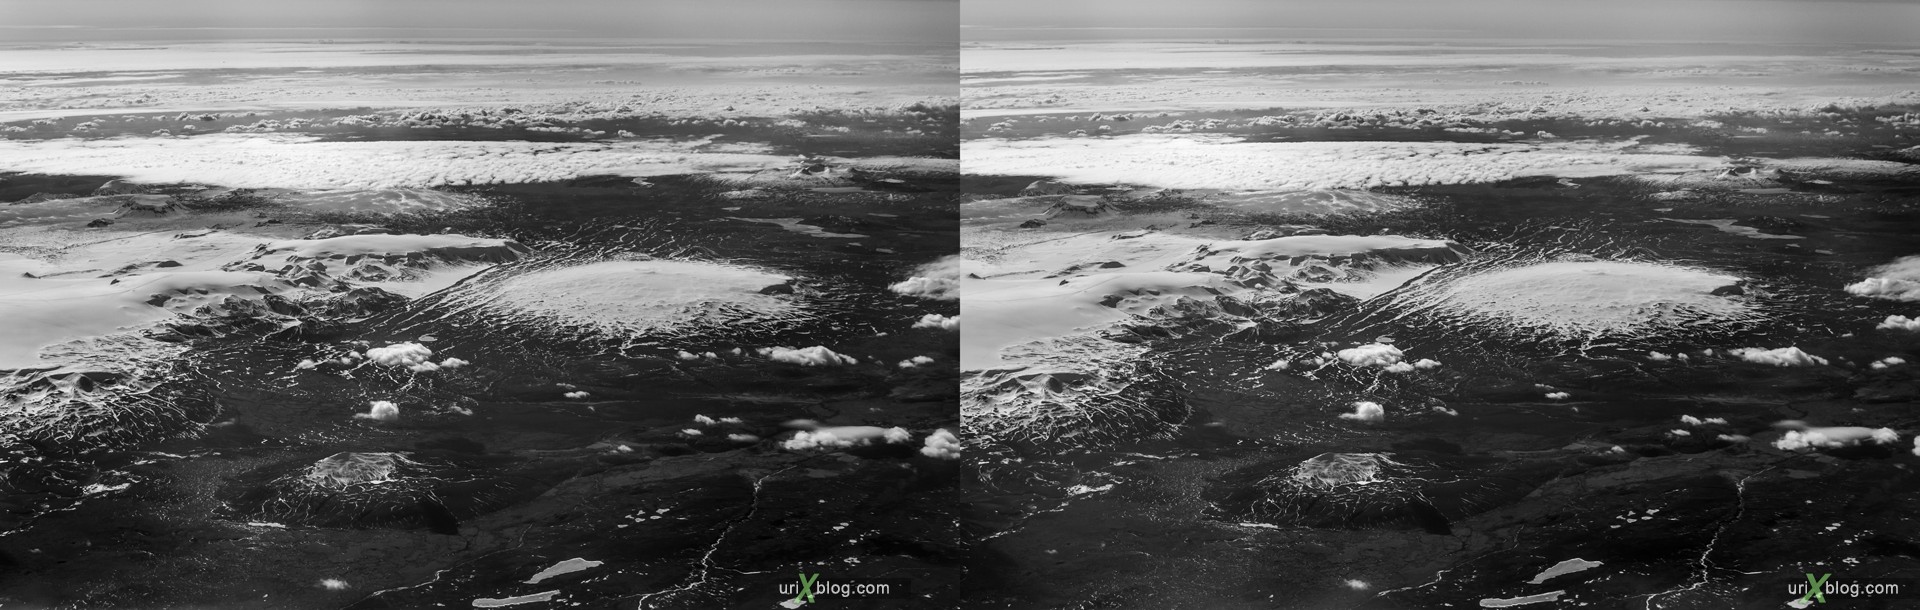 2013, Iceland, mountains, panorama, airplane, black and white, bw, snow, ice, clouds, horizon, 3D, stereo pair, cross-eyed, crossview, cross view stereo pair, stereoscopic